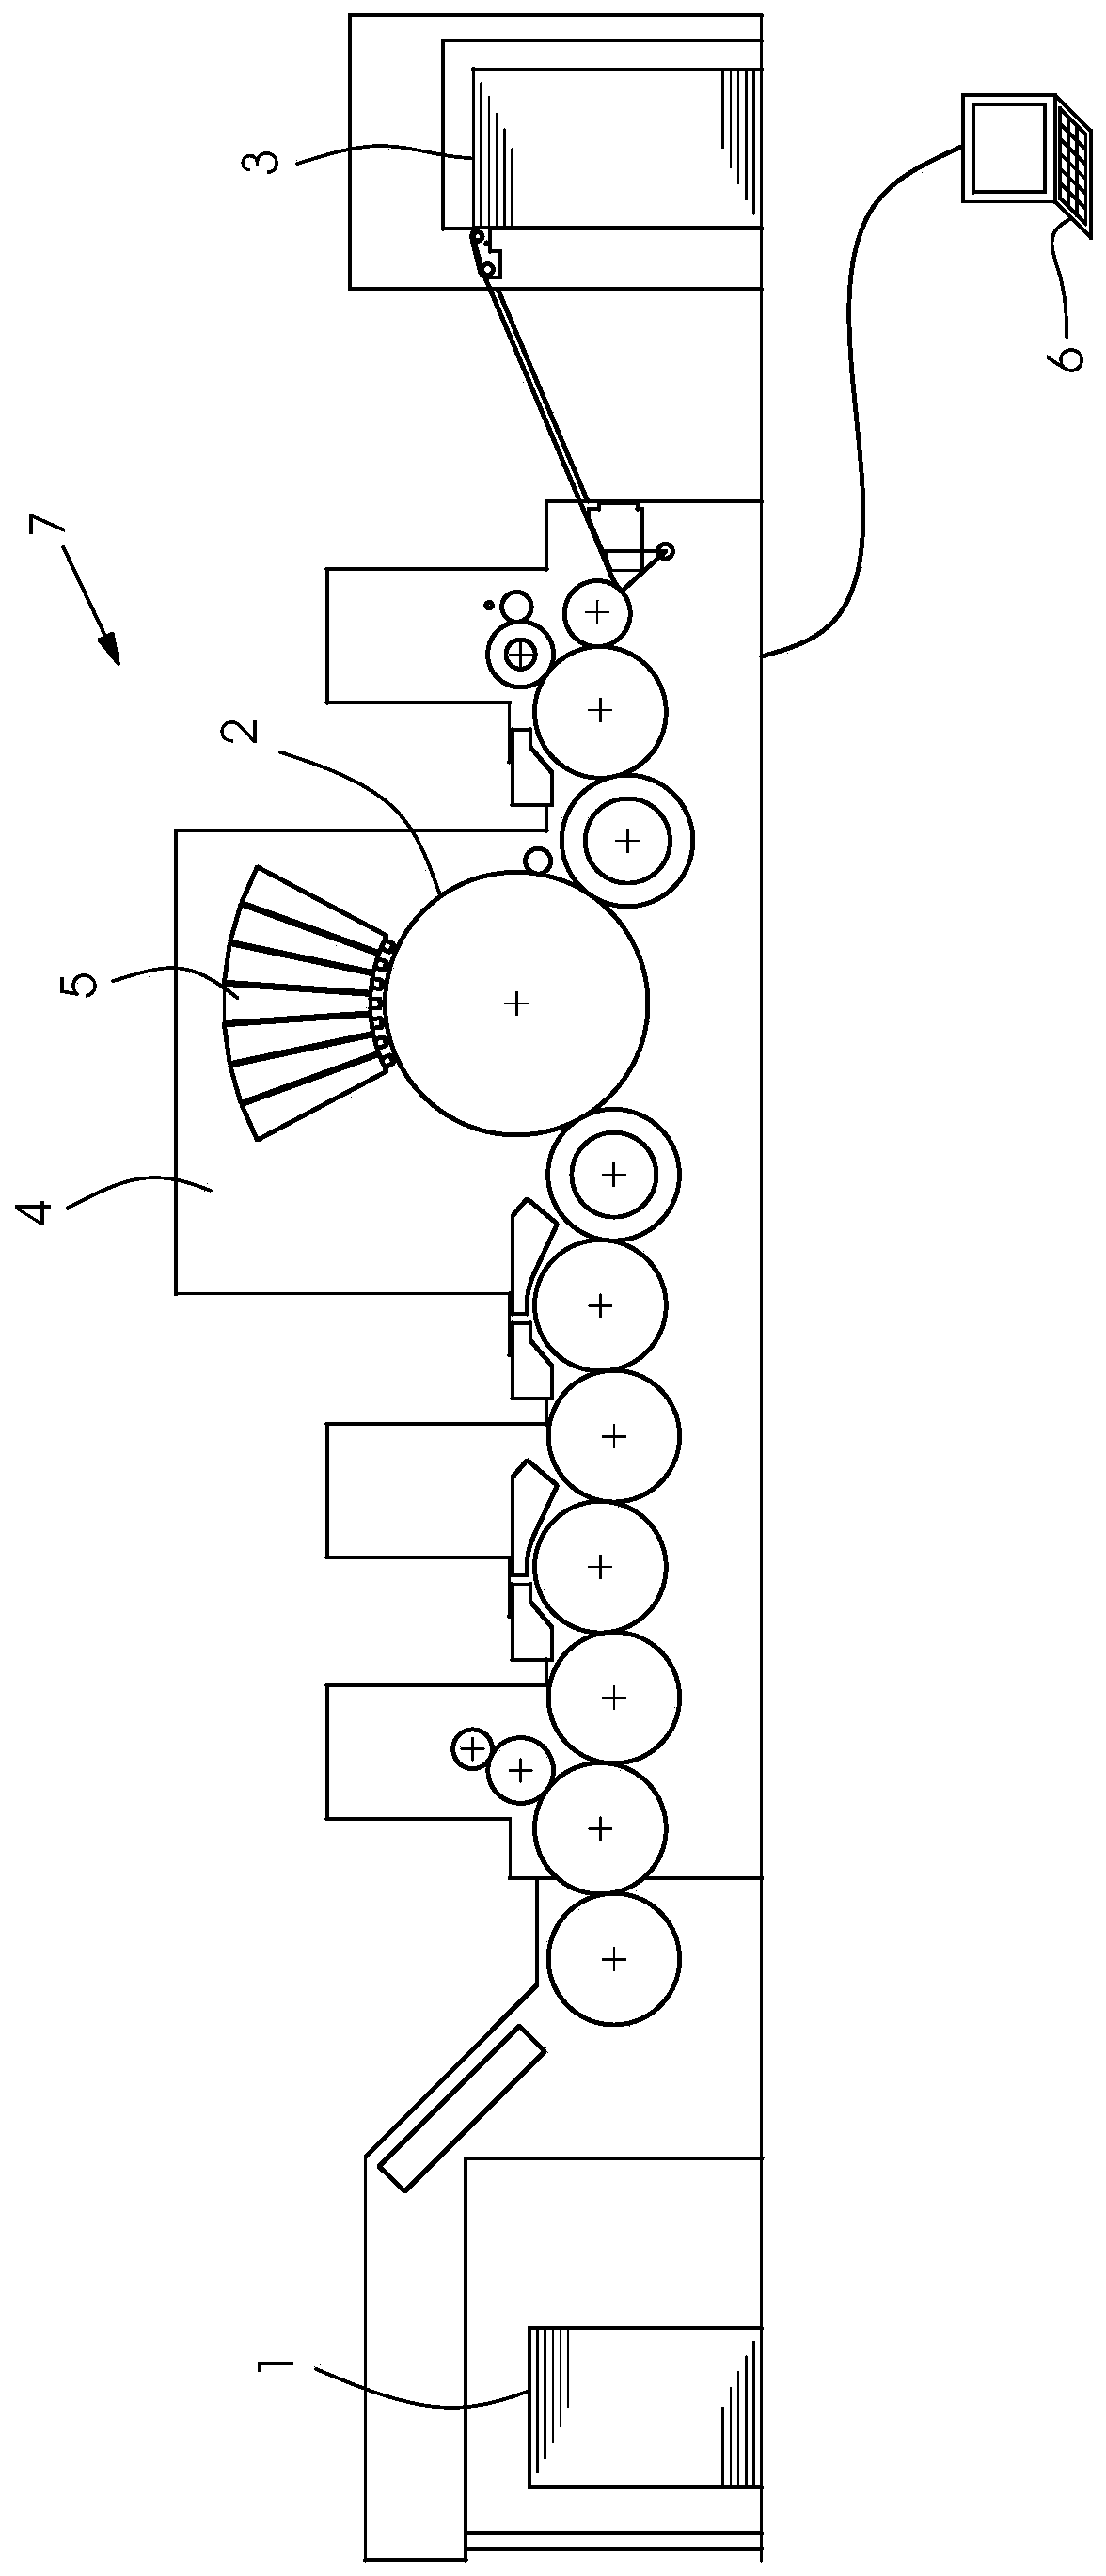 Method for computer-aided detection of faulty printing nozzles in an inkjet printing machine